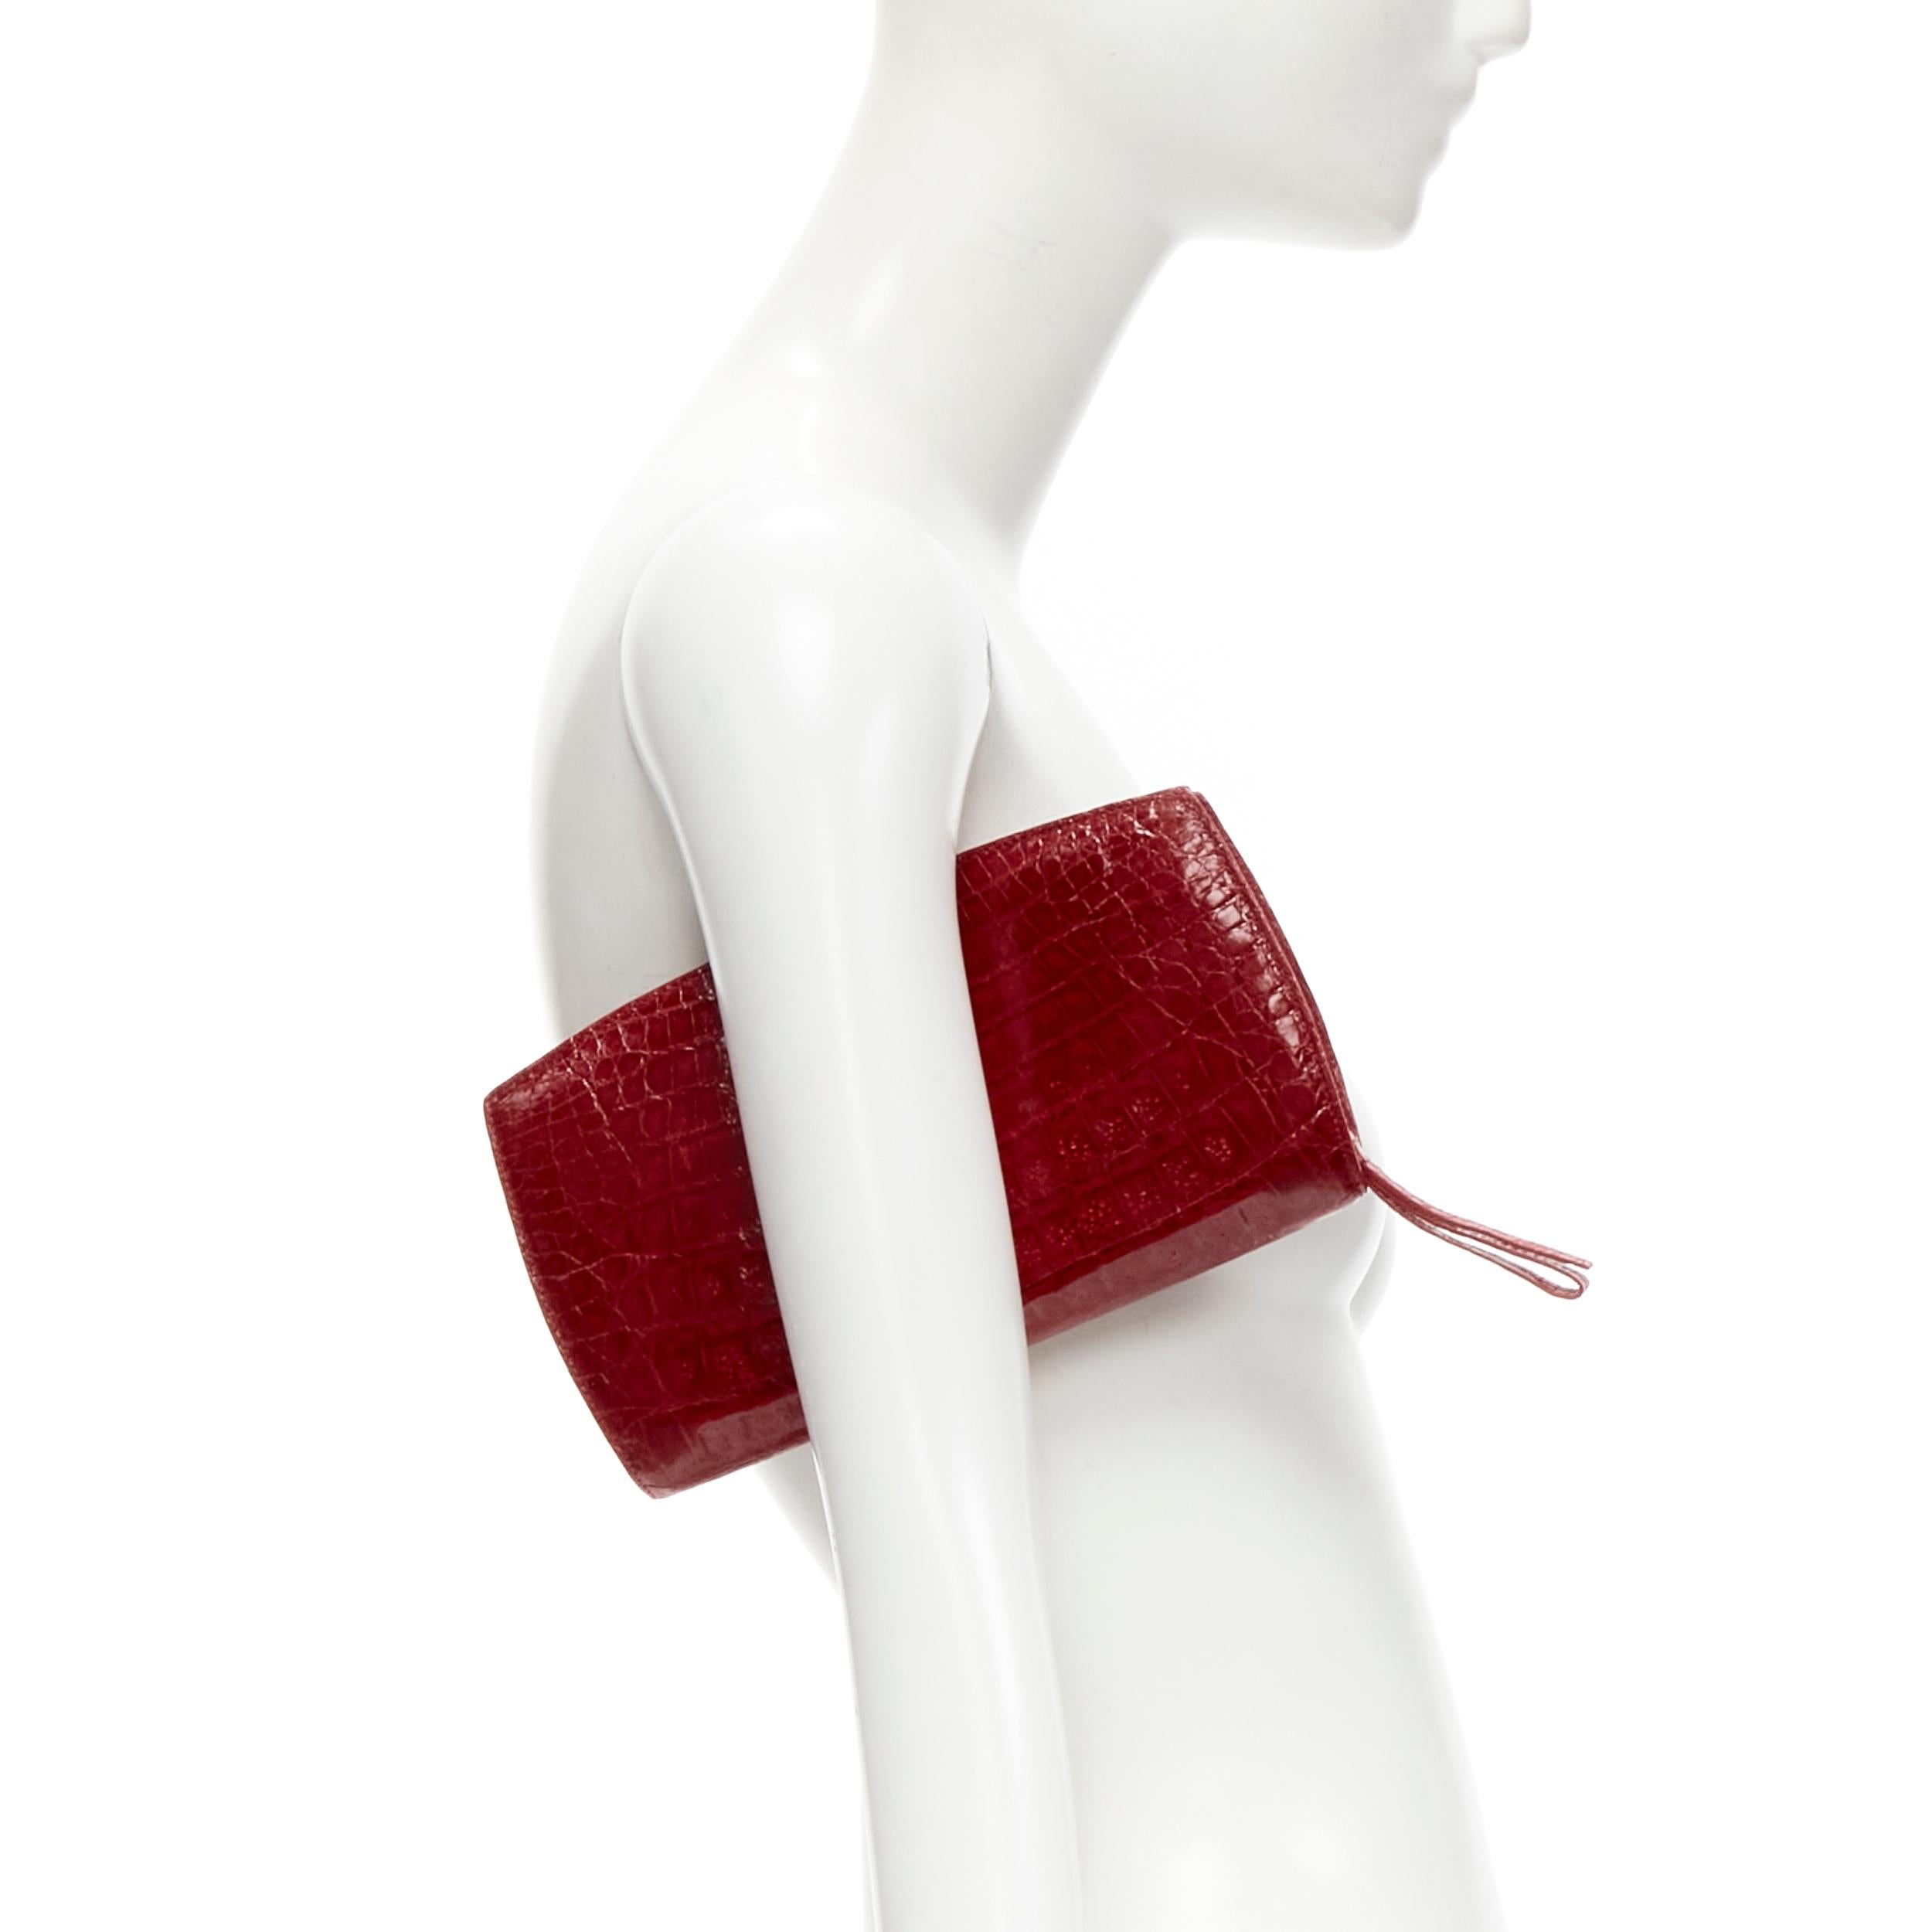 NANCY GONZALEZ red croc scaled leather luxe zip around clutch bag wallet
Reference: LNKO/A02072
Brand: Nancy Gonzalez
Material: Leather
Color: Red
Pattern: Solid
Closure: Zip
Lining: Leather

CONDITION:
Condition: Excellent, this item was pre-owned